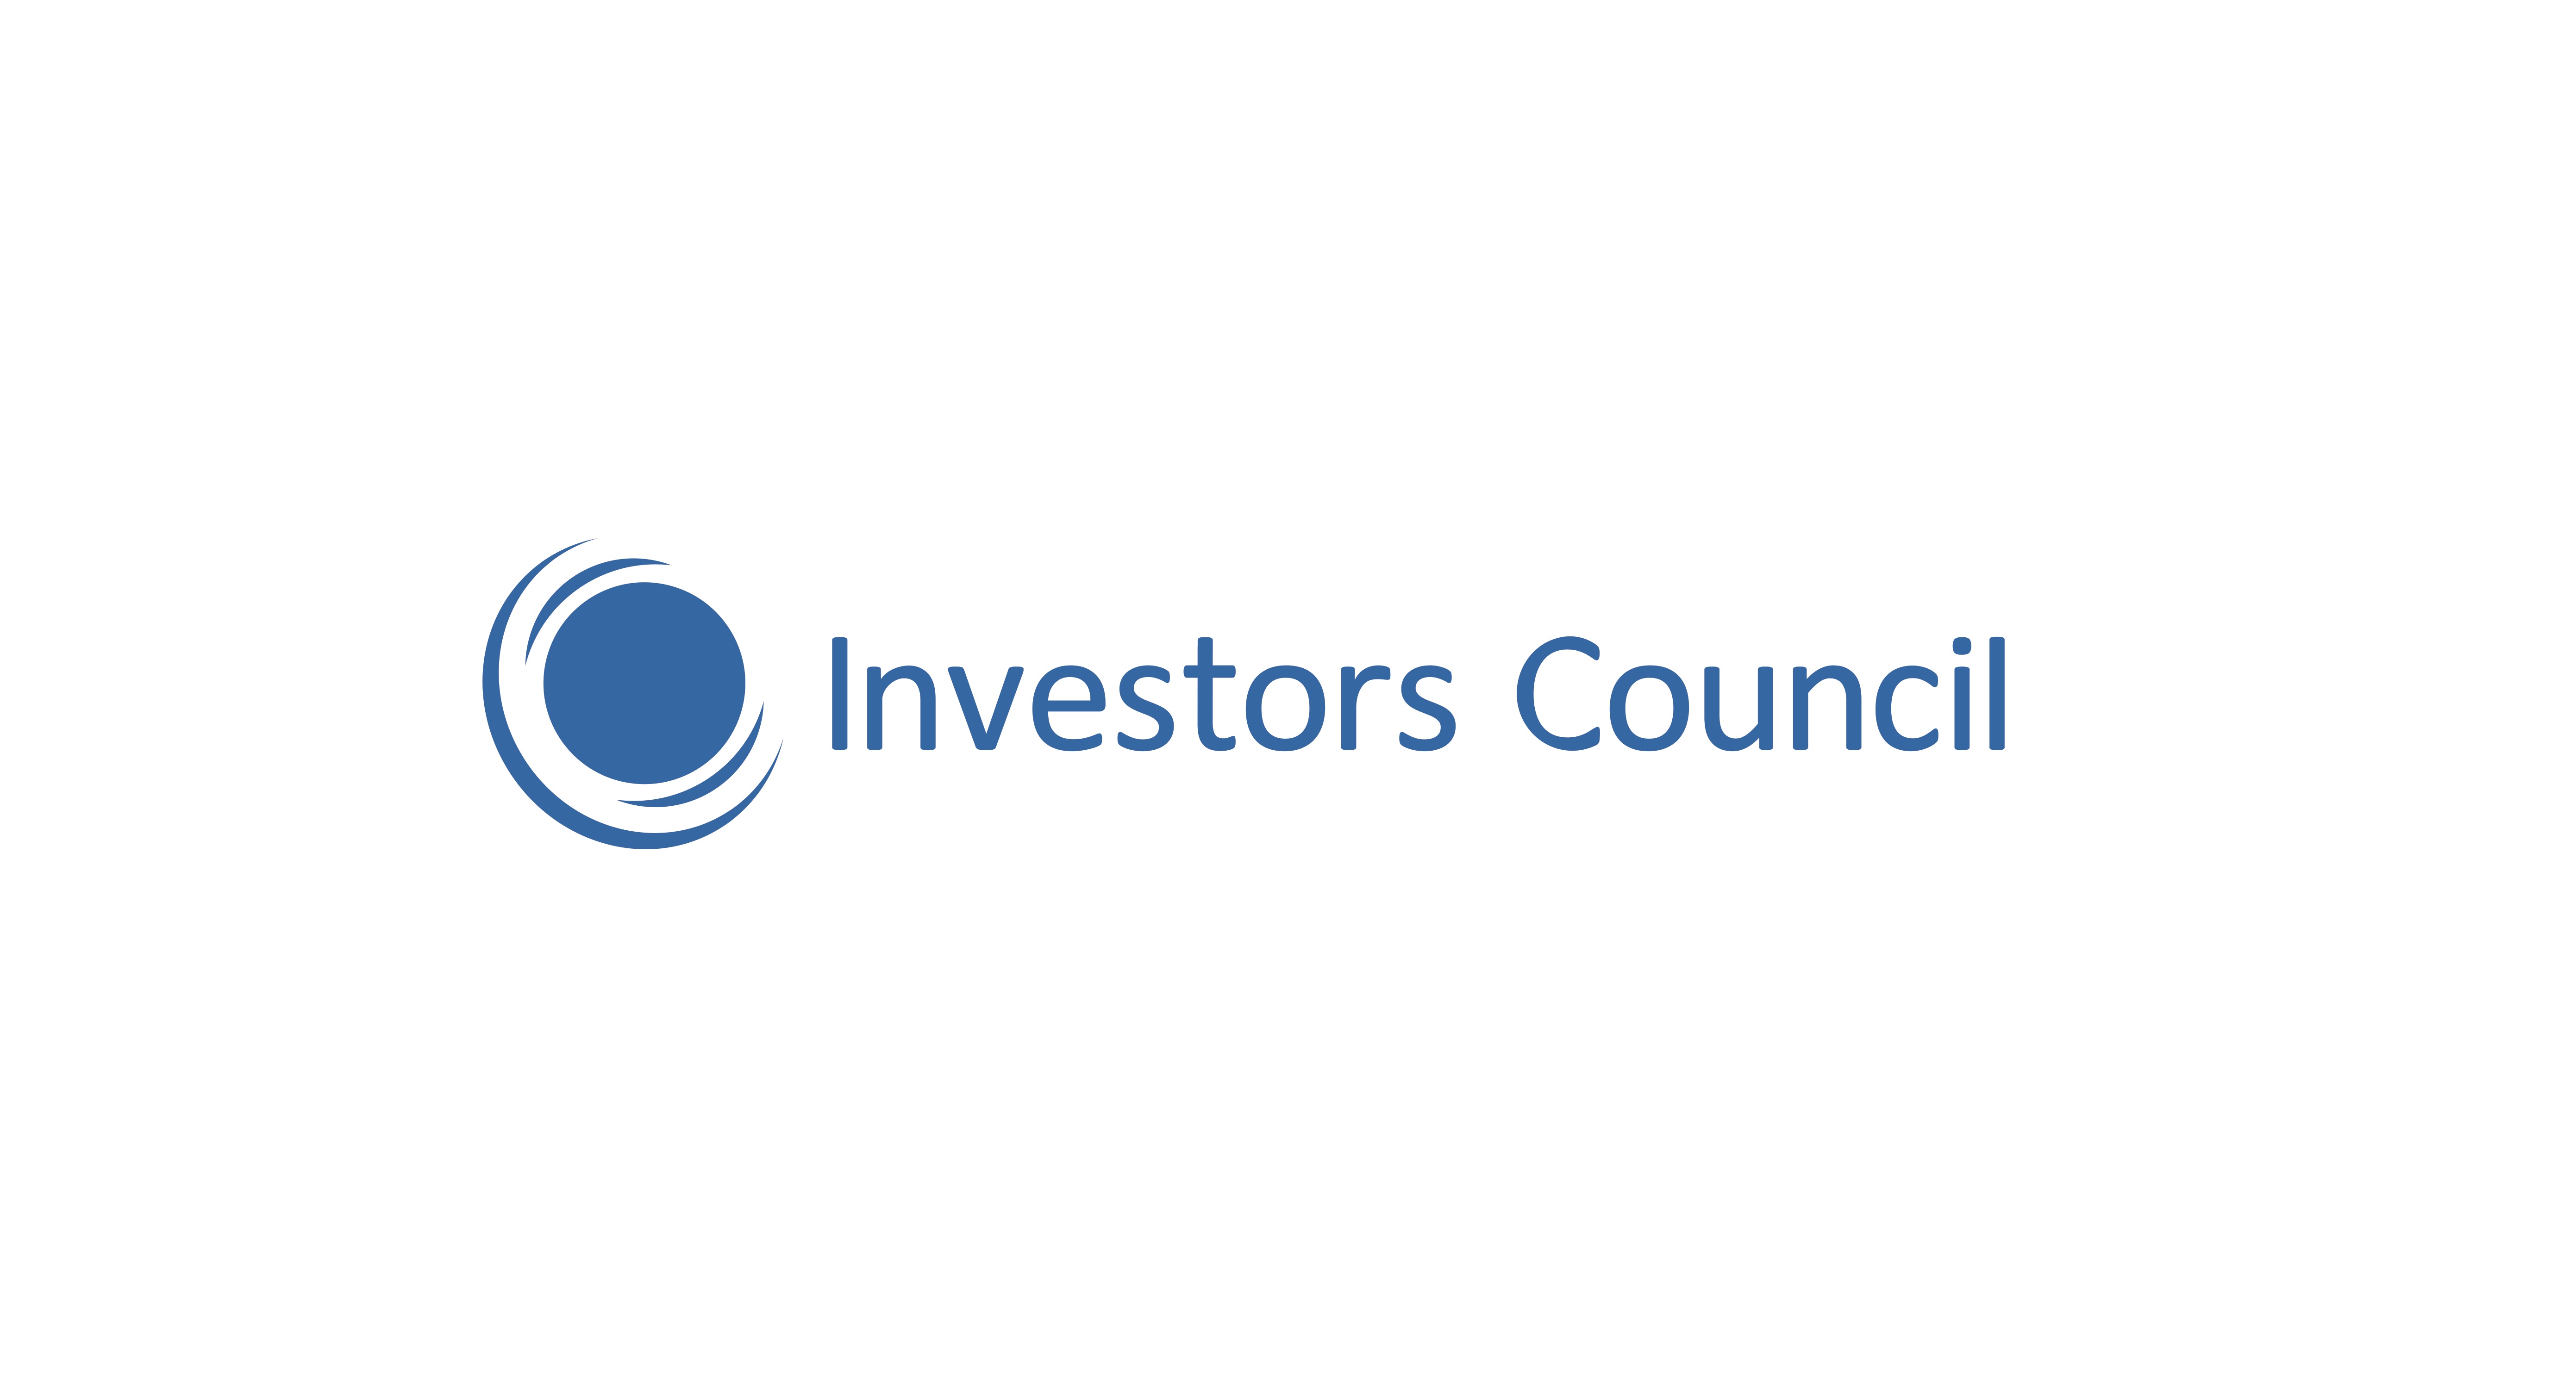 The joint open letter from the Business Associations, members of the Georgian Investors Council, addressed to the President of the European Commission, Dr. Ursula von der Leyen